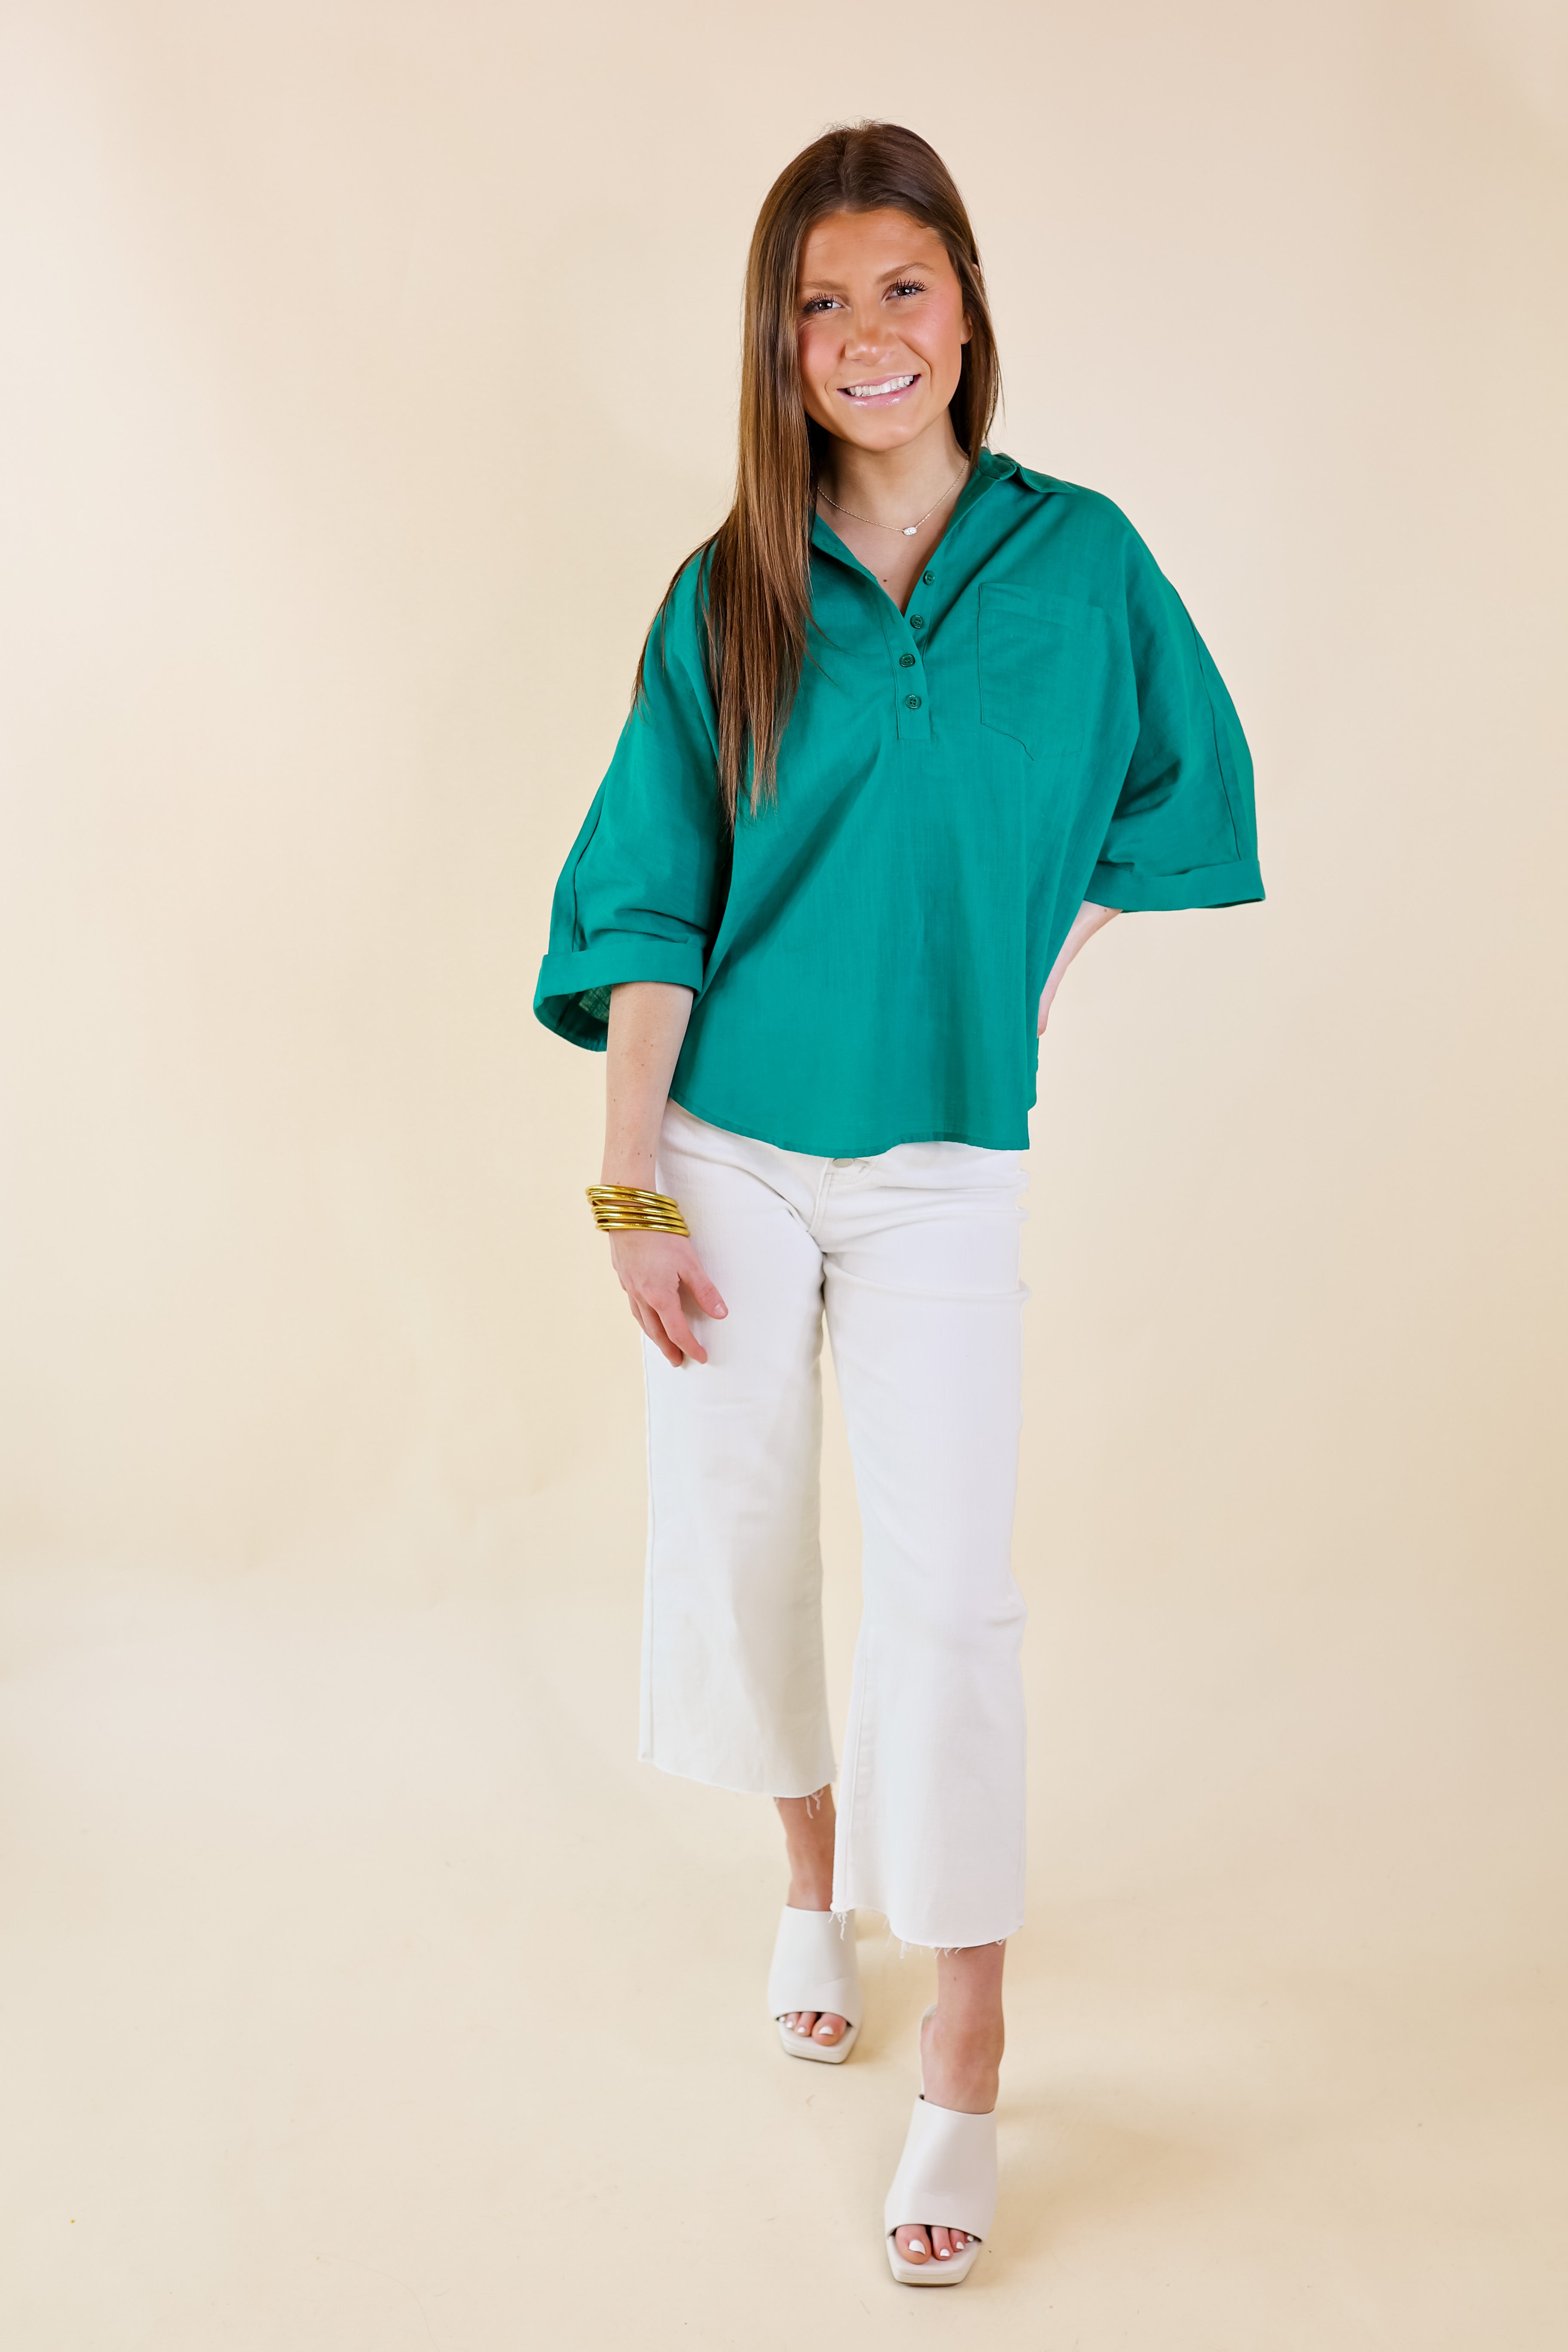 Sweet Surprise Half Button Up Poncho Top with Collared Neckline in Teal Green - Giddy Up Glamour Boutique